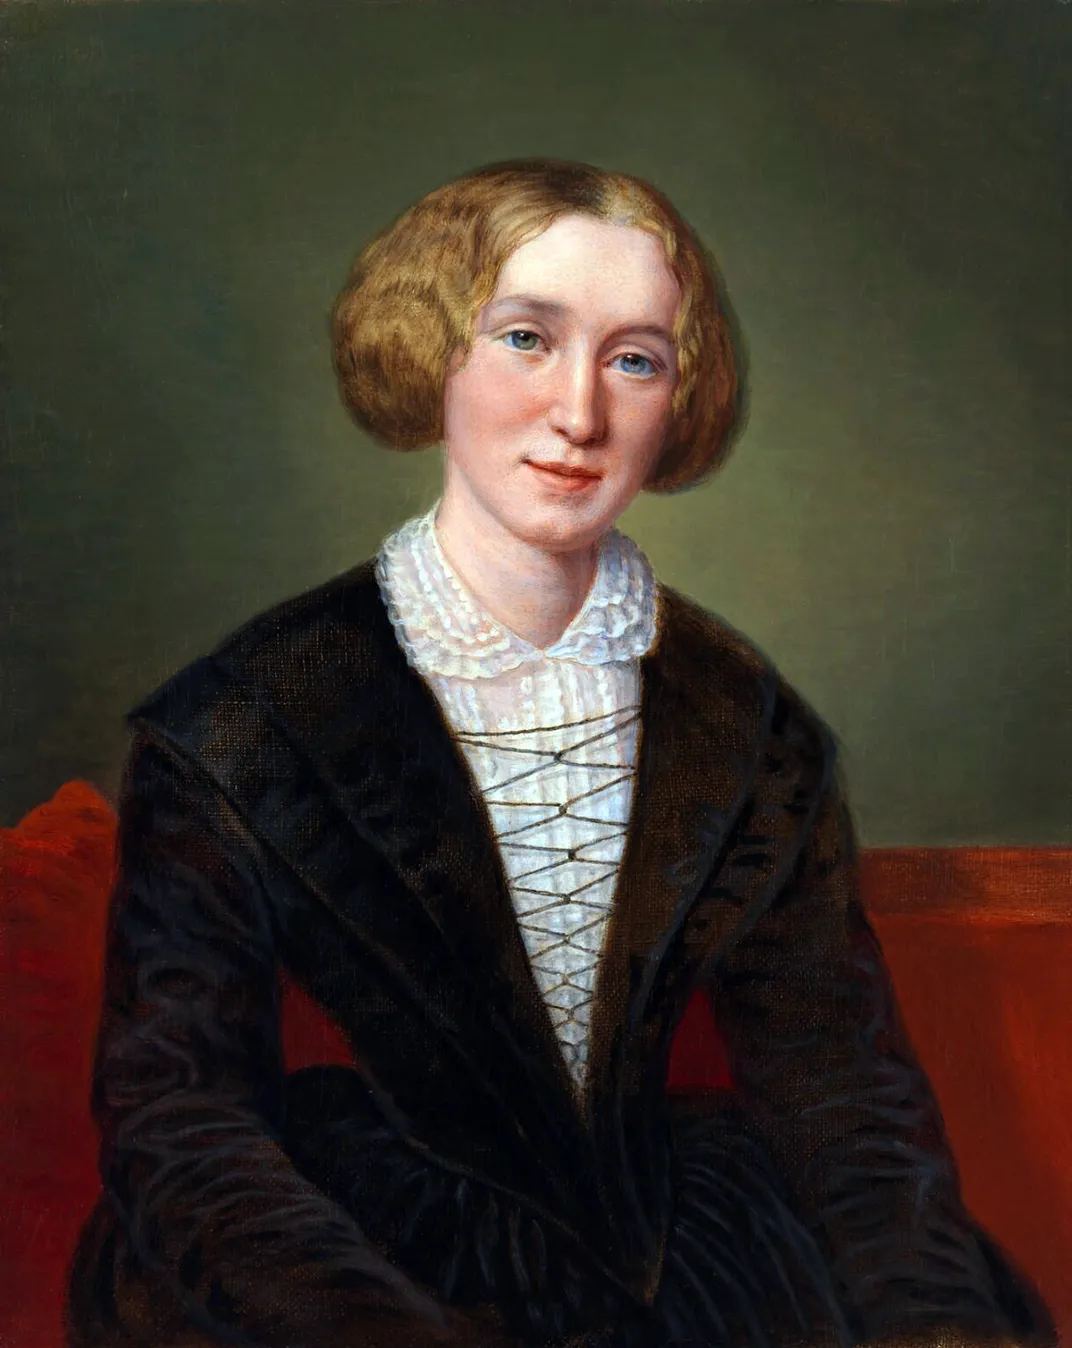 A painted portrait of Eliot, who is white, faces viewer, wearing a black dress with a white lace collar and sitting in front of a red and brown backdrop